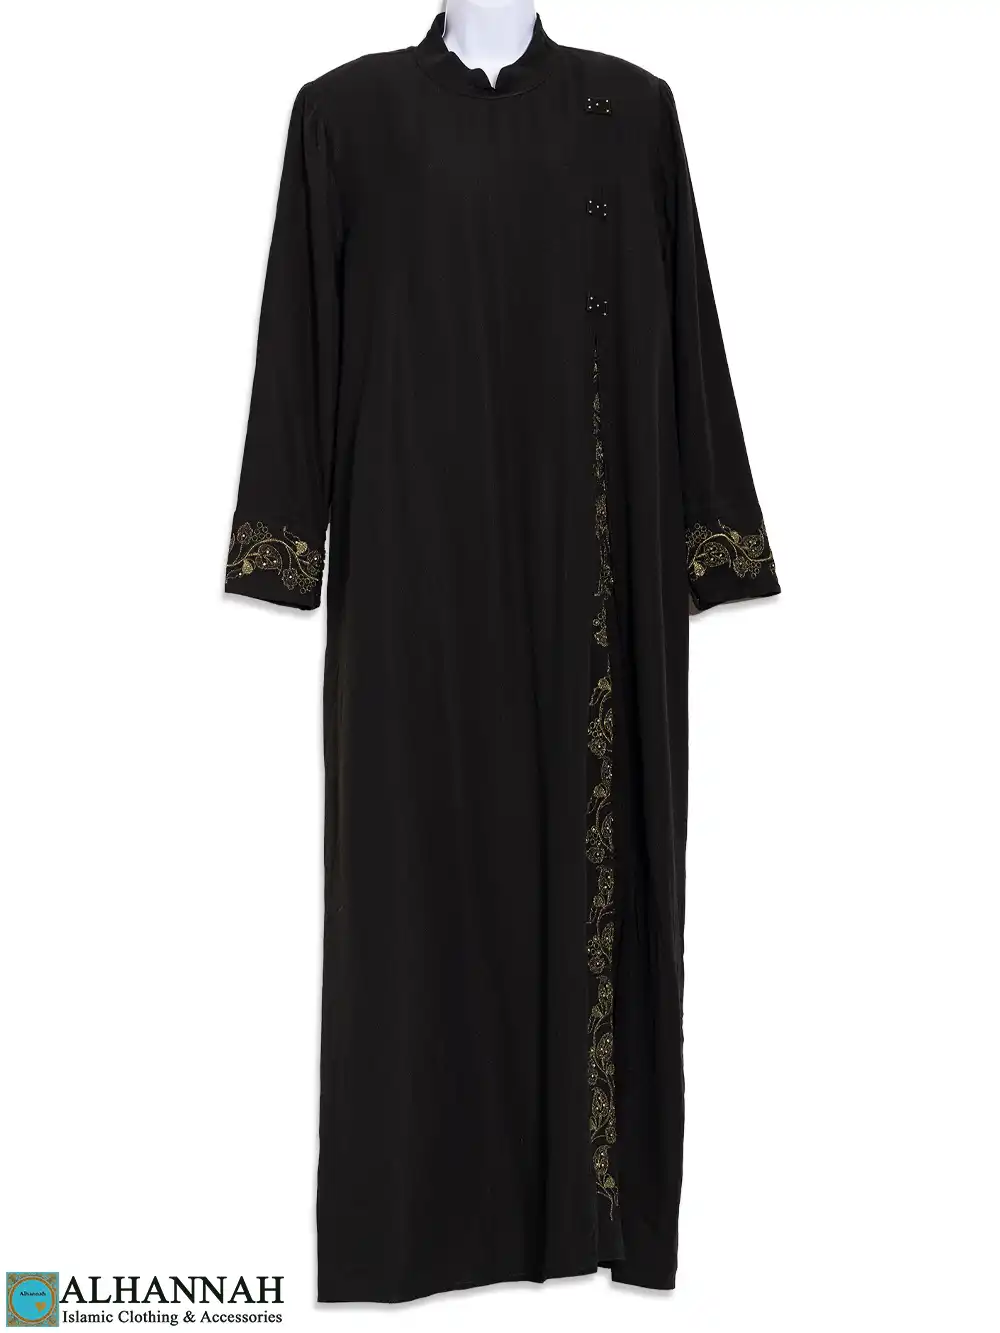 Golden Floral Abaya in US Size 16/18 | ab901 | Alhannah Islamic Clothing